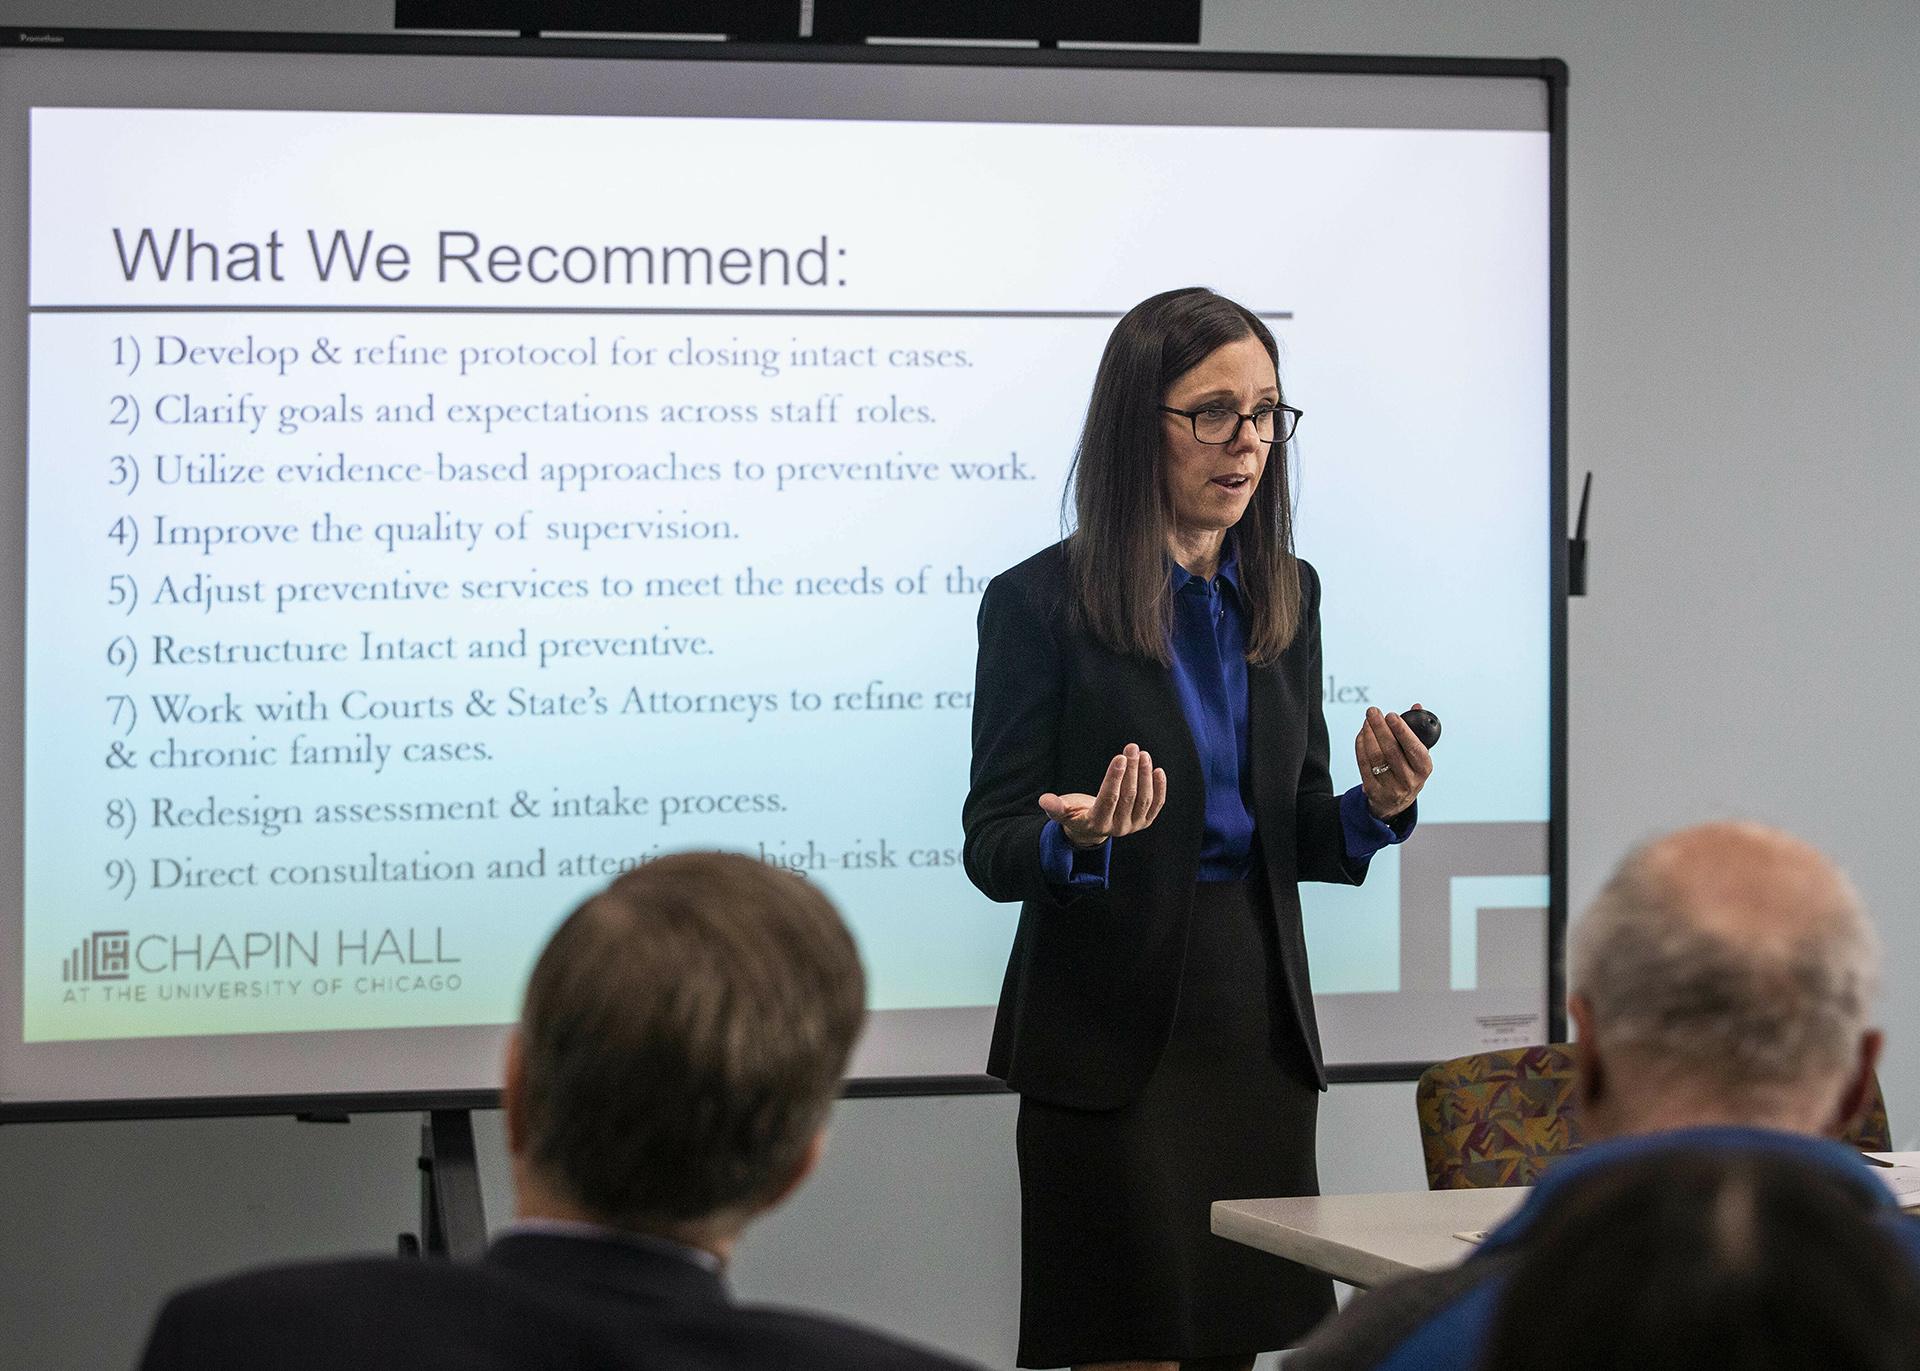 In this May 13, 2019 photo, Dana Weiner, policy fellow at Chapin Hall at the University of Chicago, discusses a review of the Illinois Department of Children and Family Services’ Intact Family Services program, during a press event at DCFS. (Ashlee Rezin/Sun Times via AP)